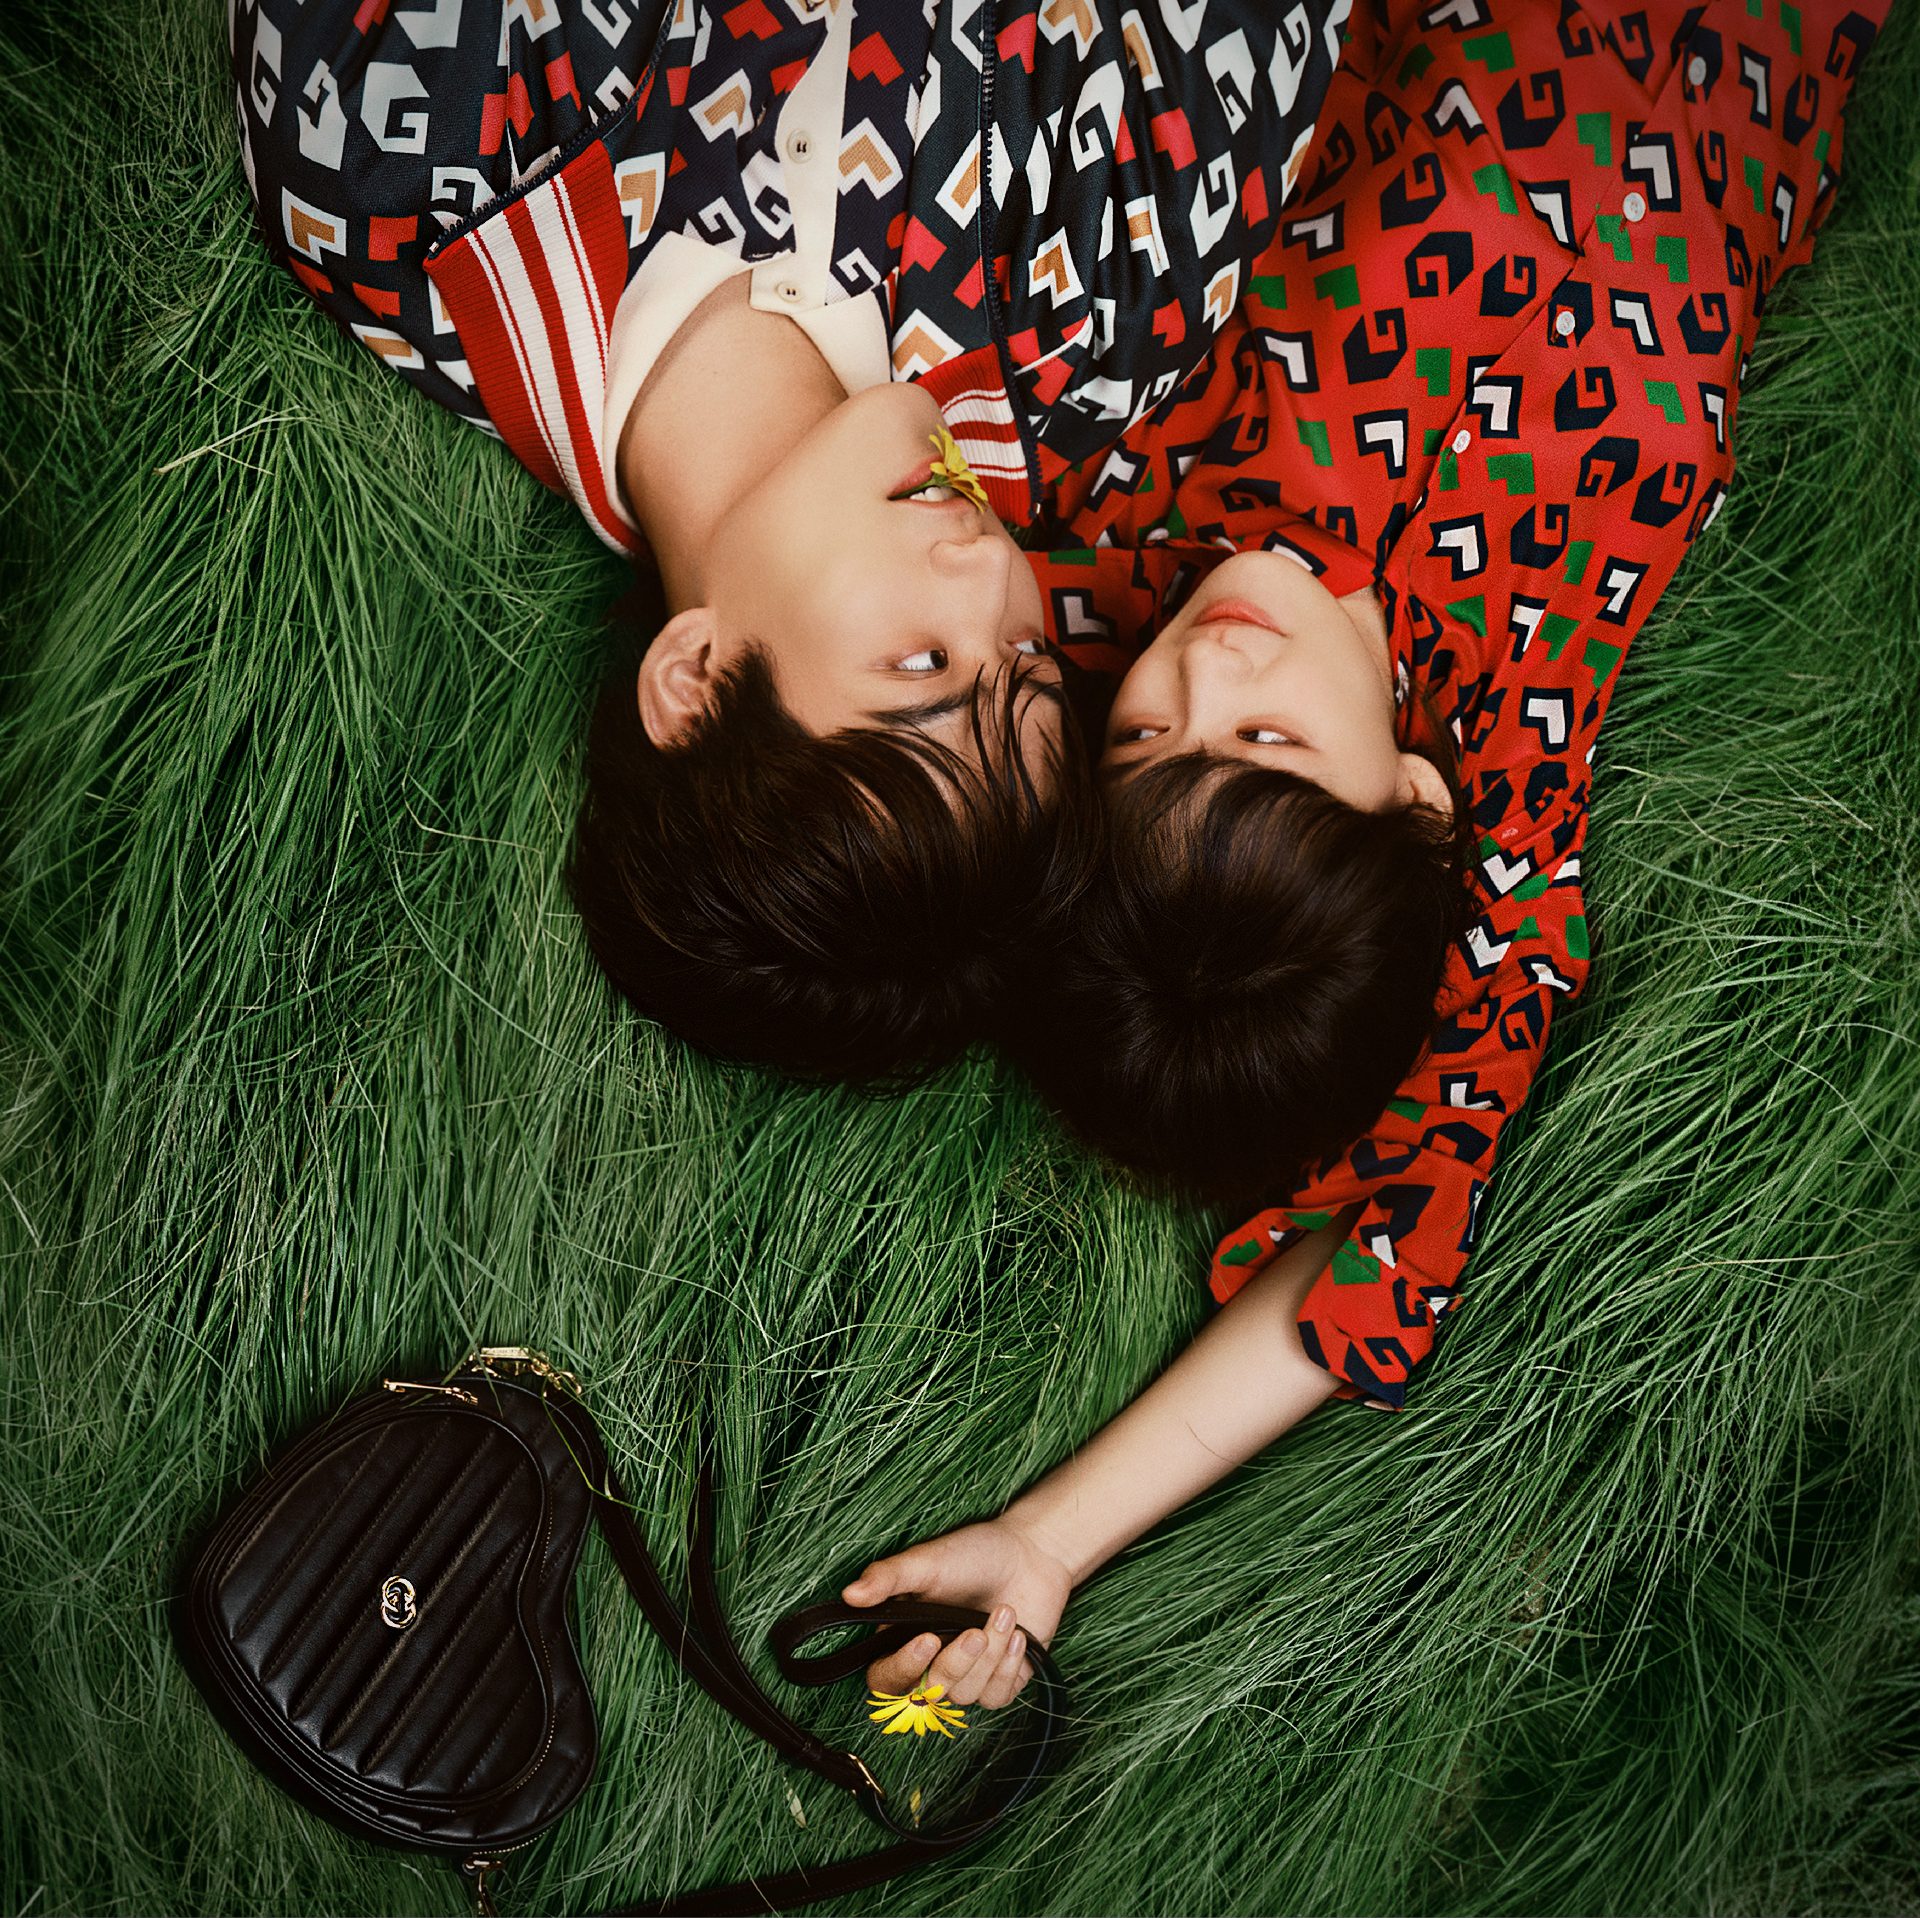 Gucci presents a new campaign starring actress and brand ambassador Wen Qi and singer and actor Daniel Zhou in a playful and joyous ode to love and human connection via 360 MAGAZINE.